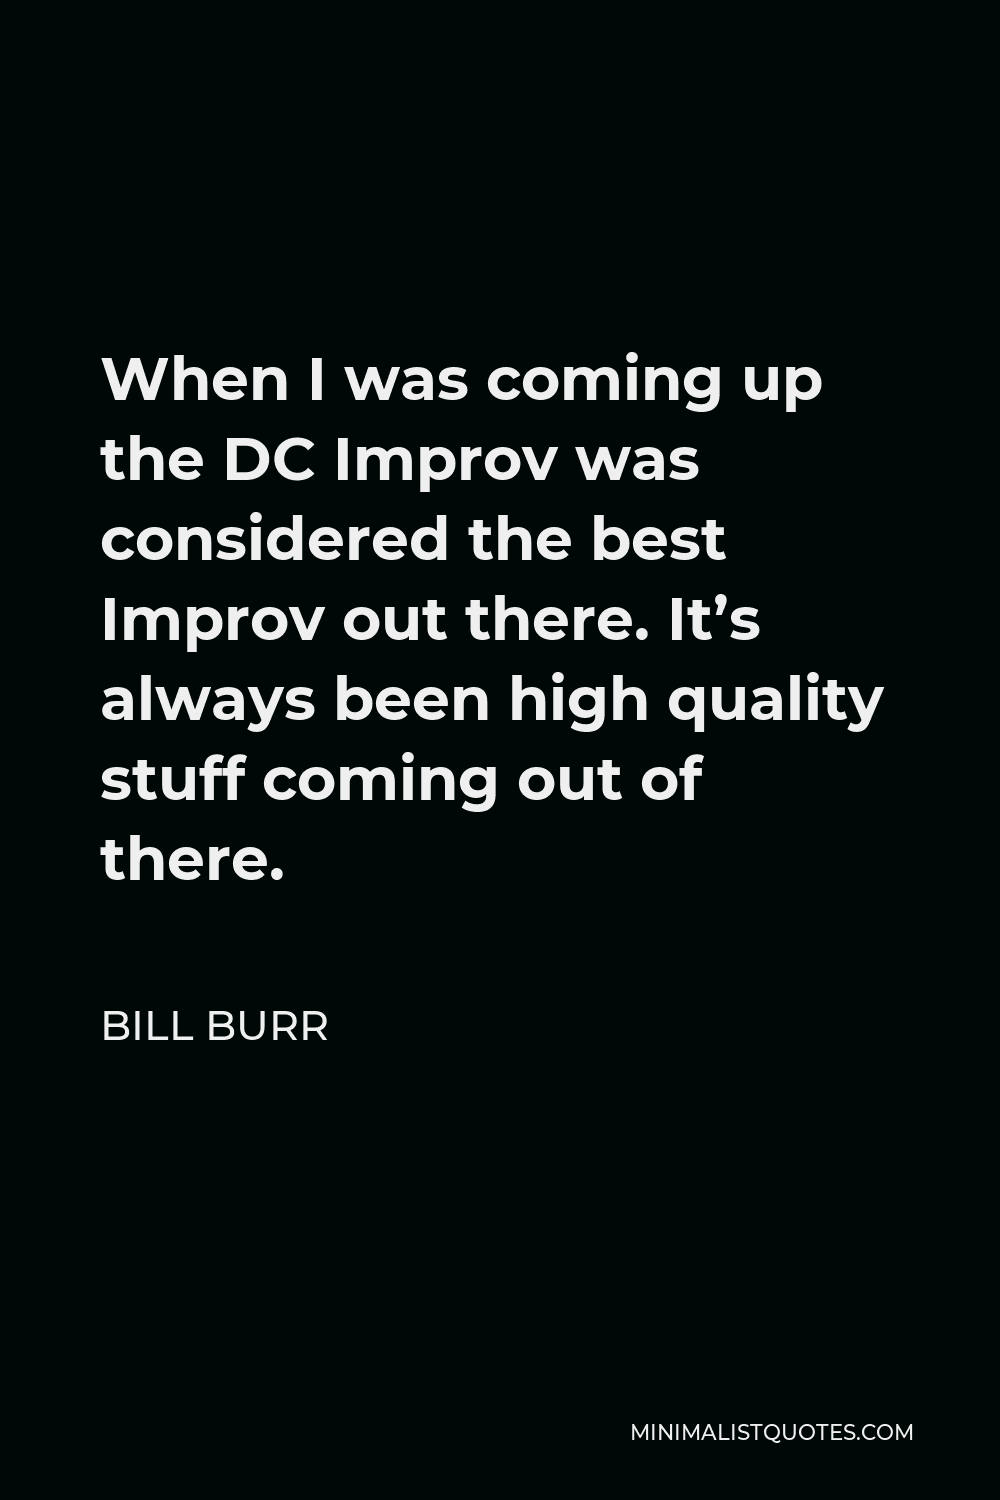 Bill Burr Quote - When I was coming up the DC Improv was considered the best Improv out there. It’s always been high quality stuff coming out of there.